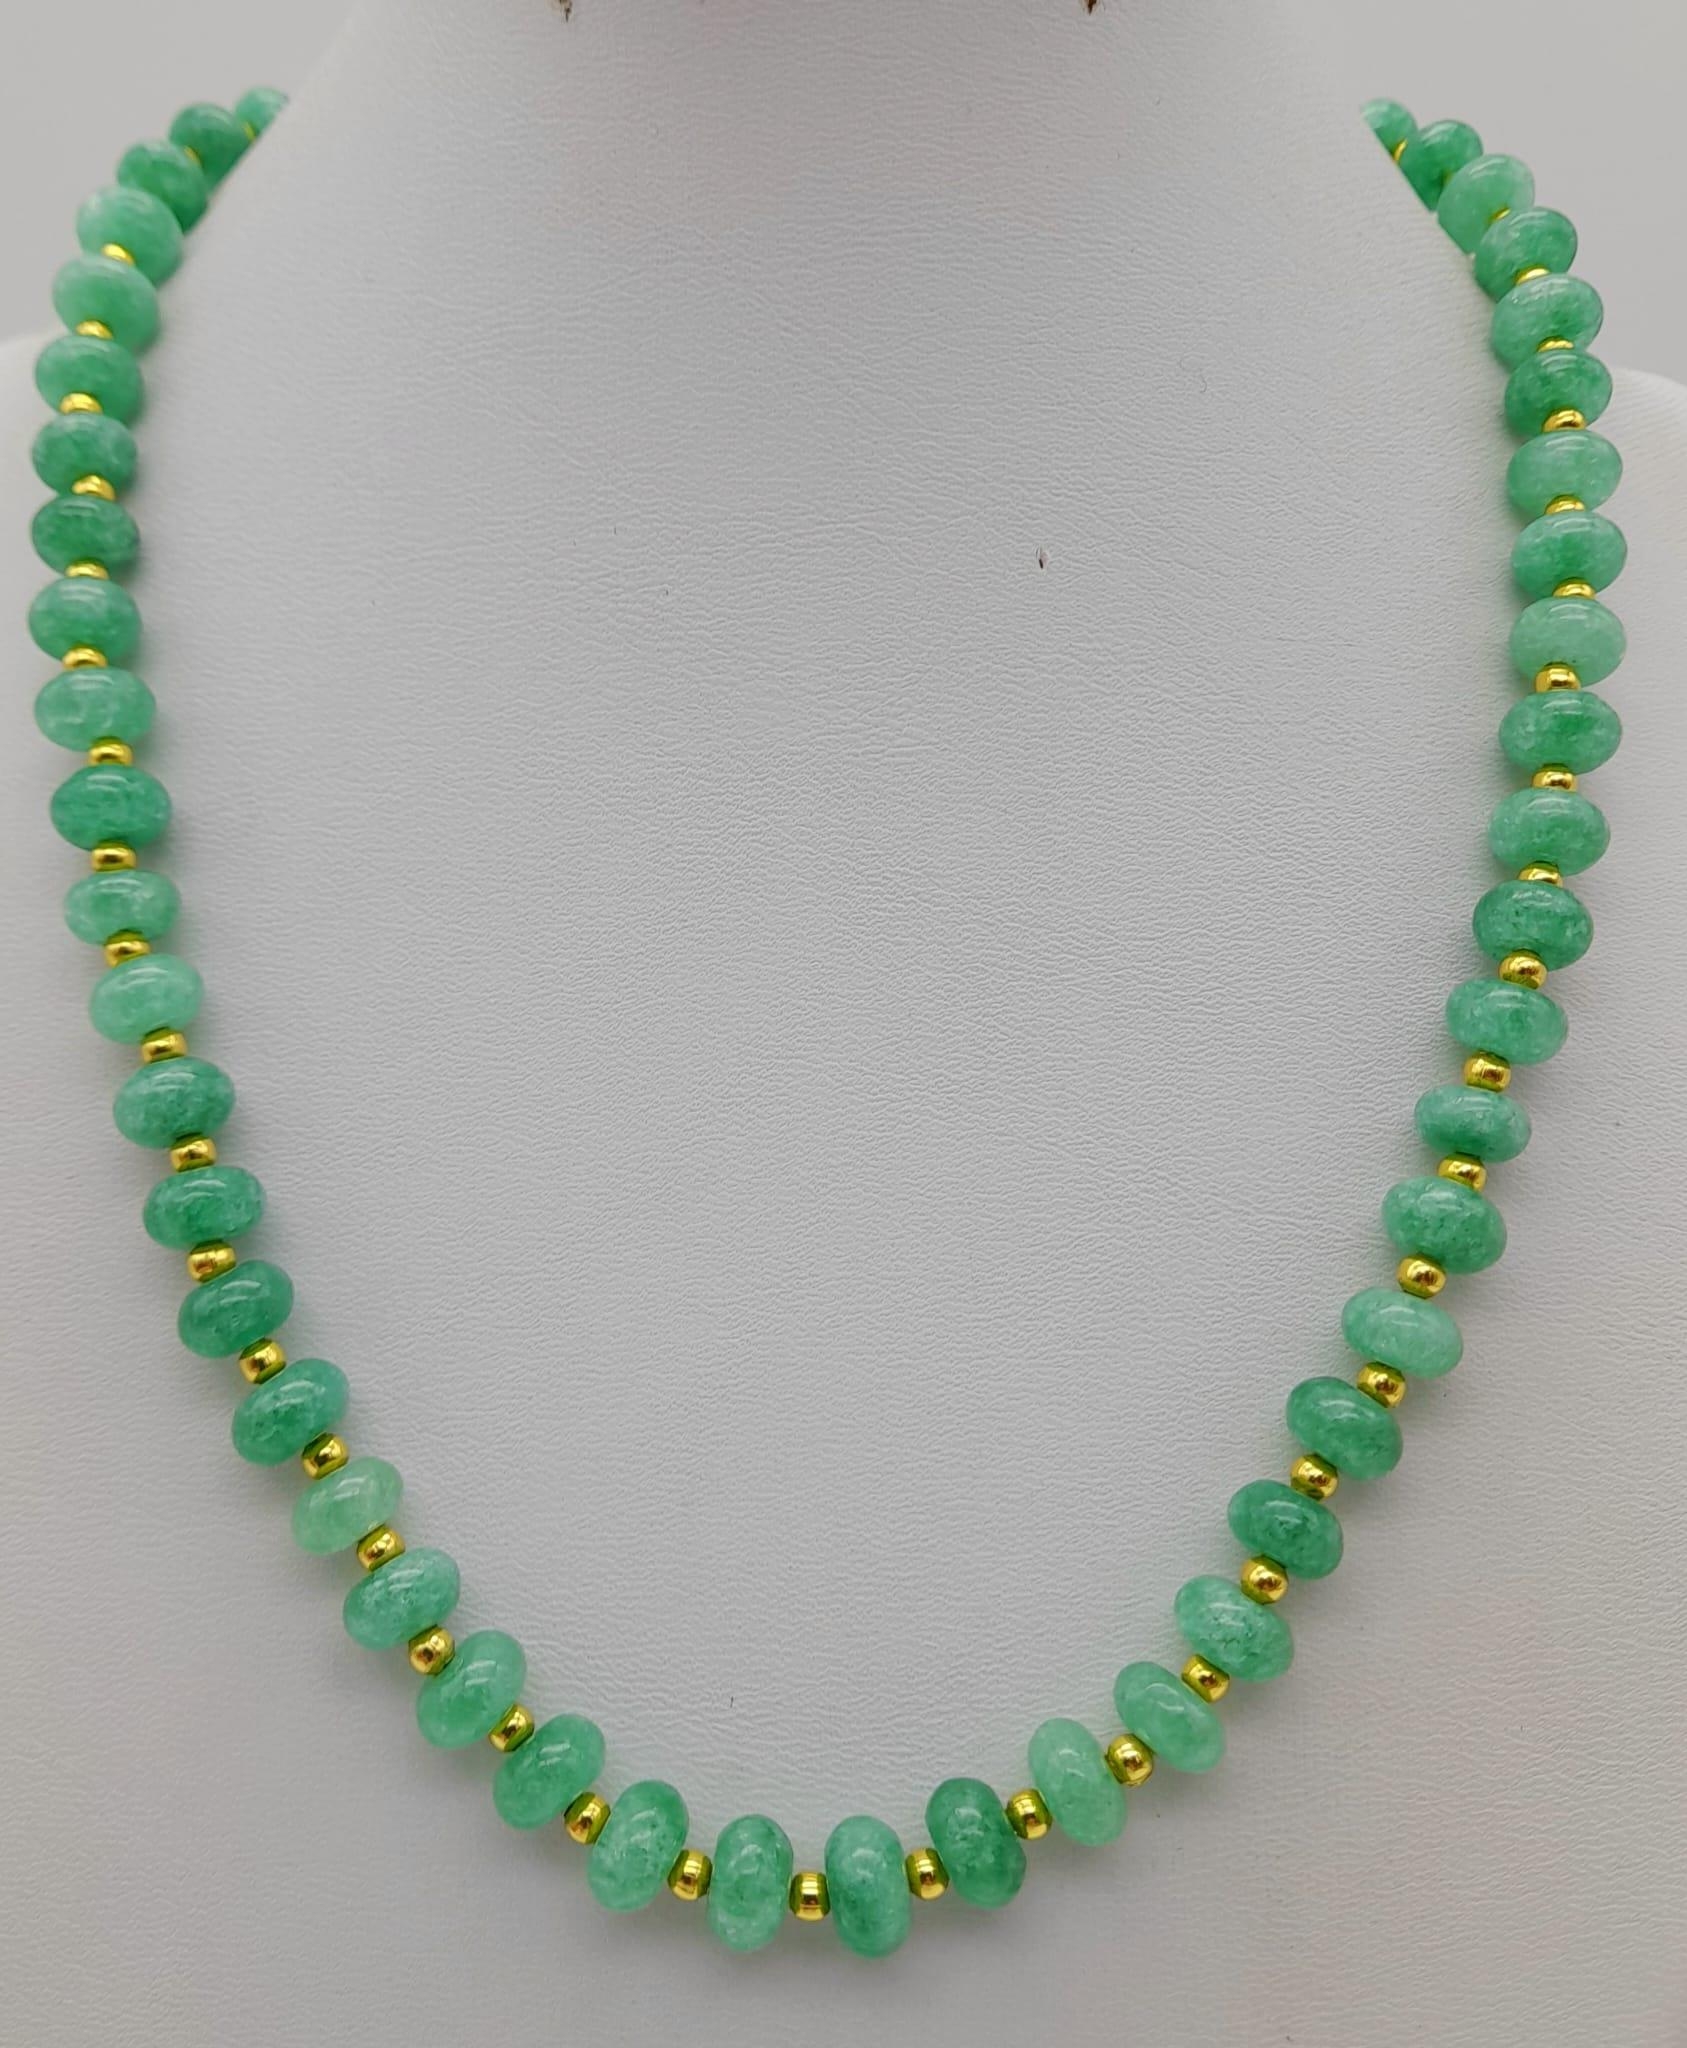 An Emerald Bead Necklace. Gilded spacers and clasp. 44cm.